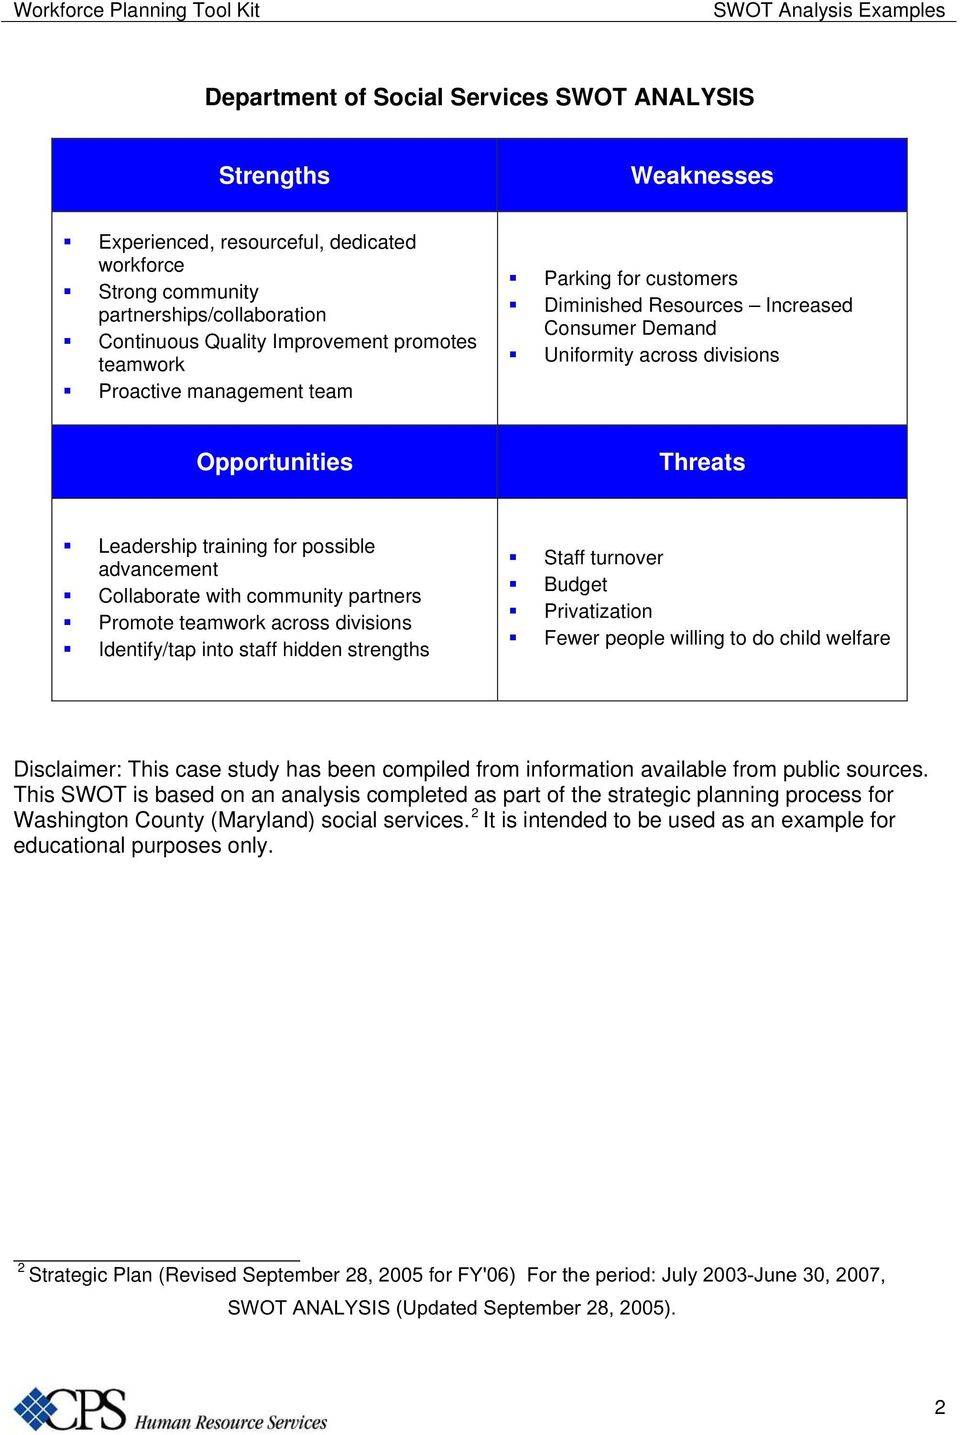 hr department swot analysis example